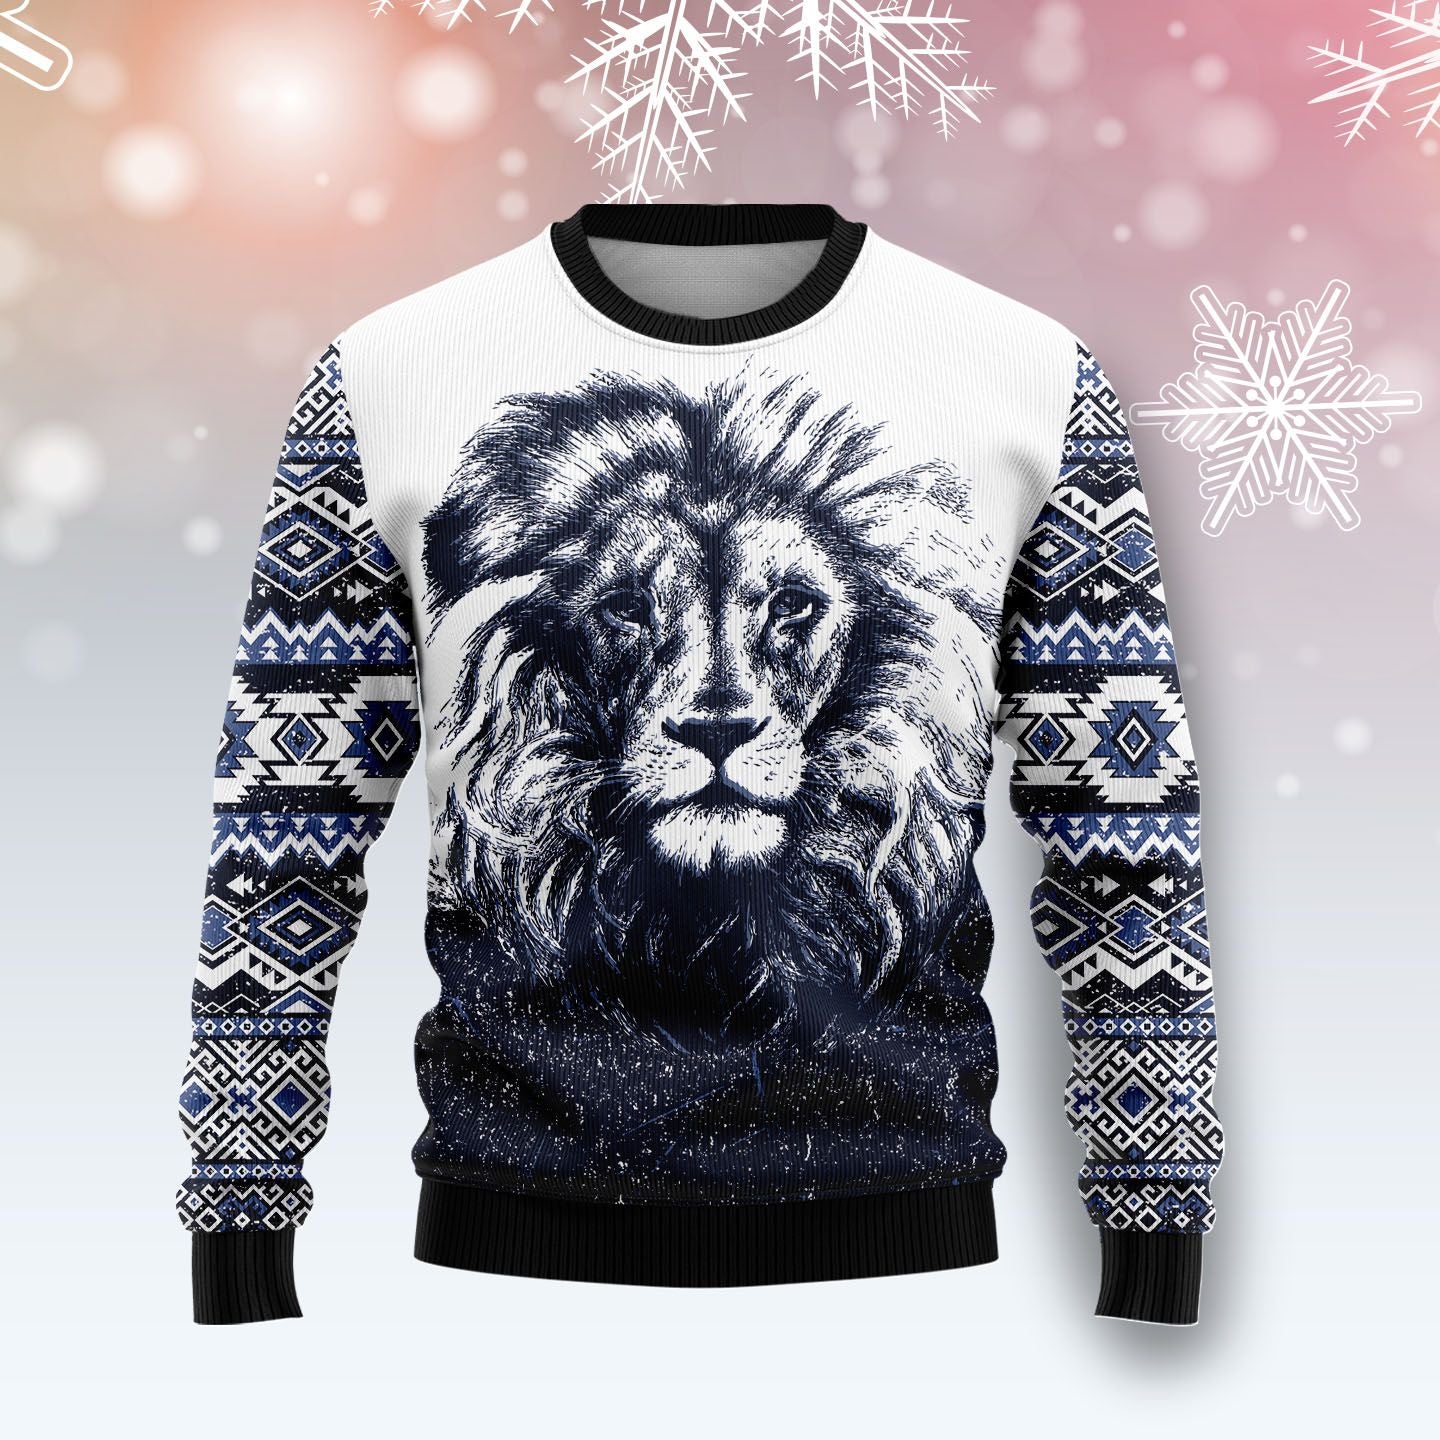 Awesome Lion G5106 Ugly Christmas Sweater